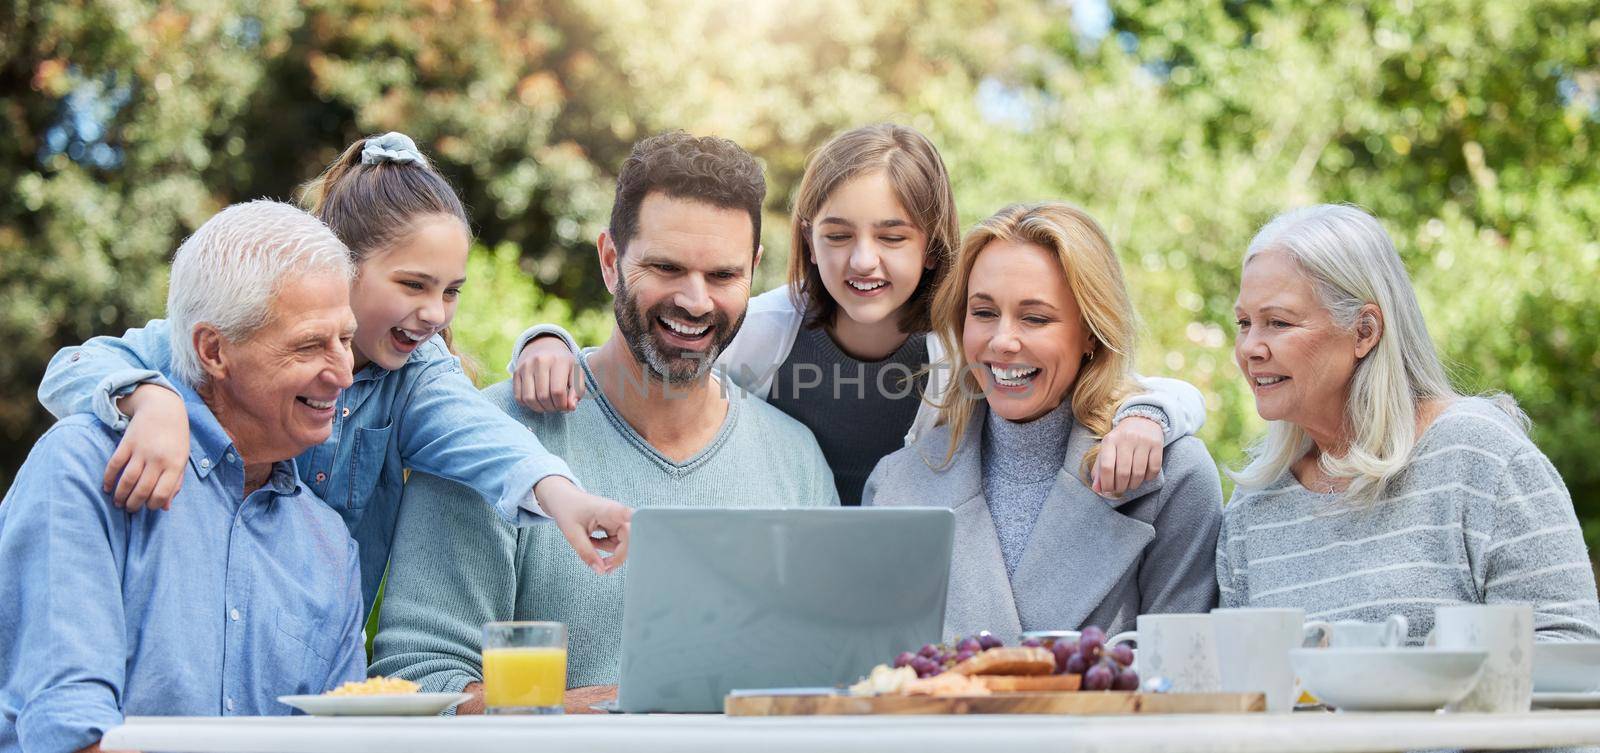 Shot of a family using a laptop outside.